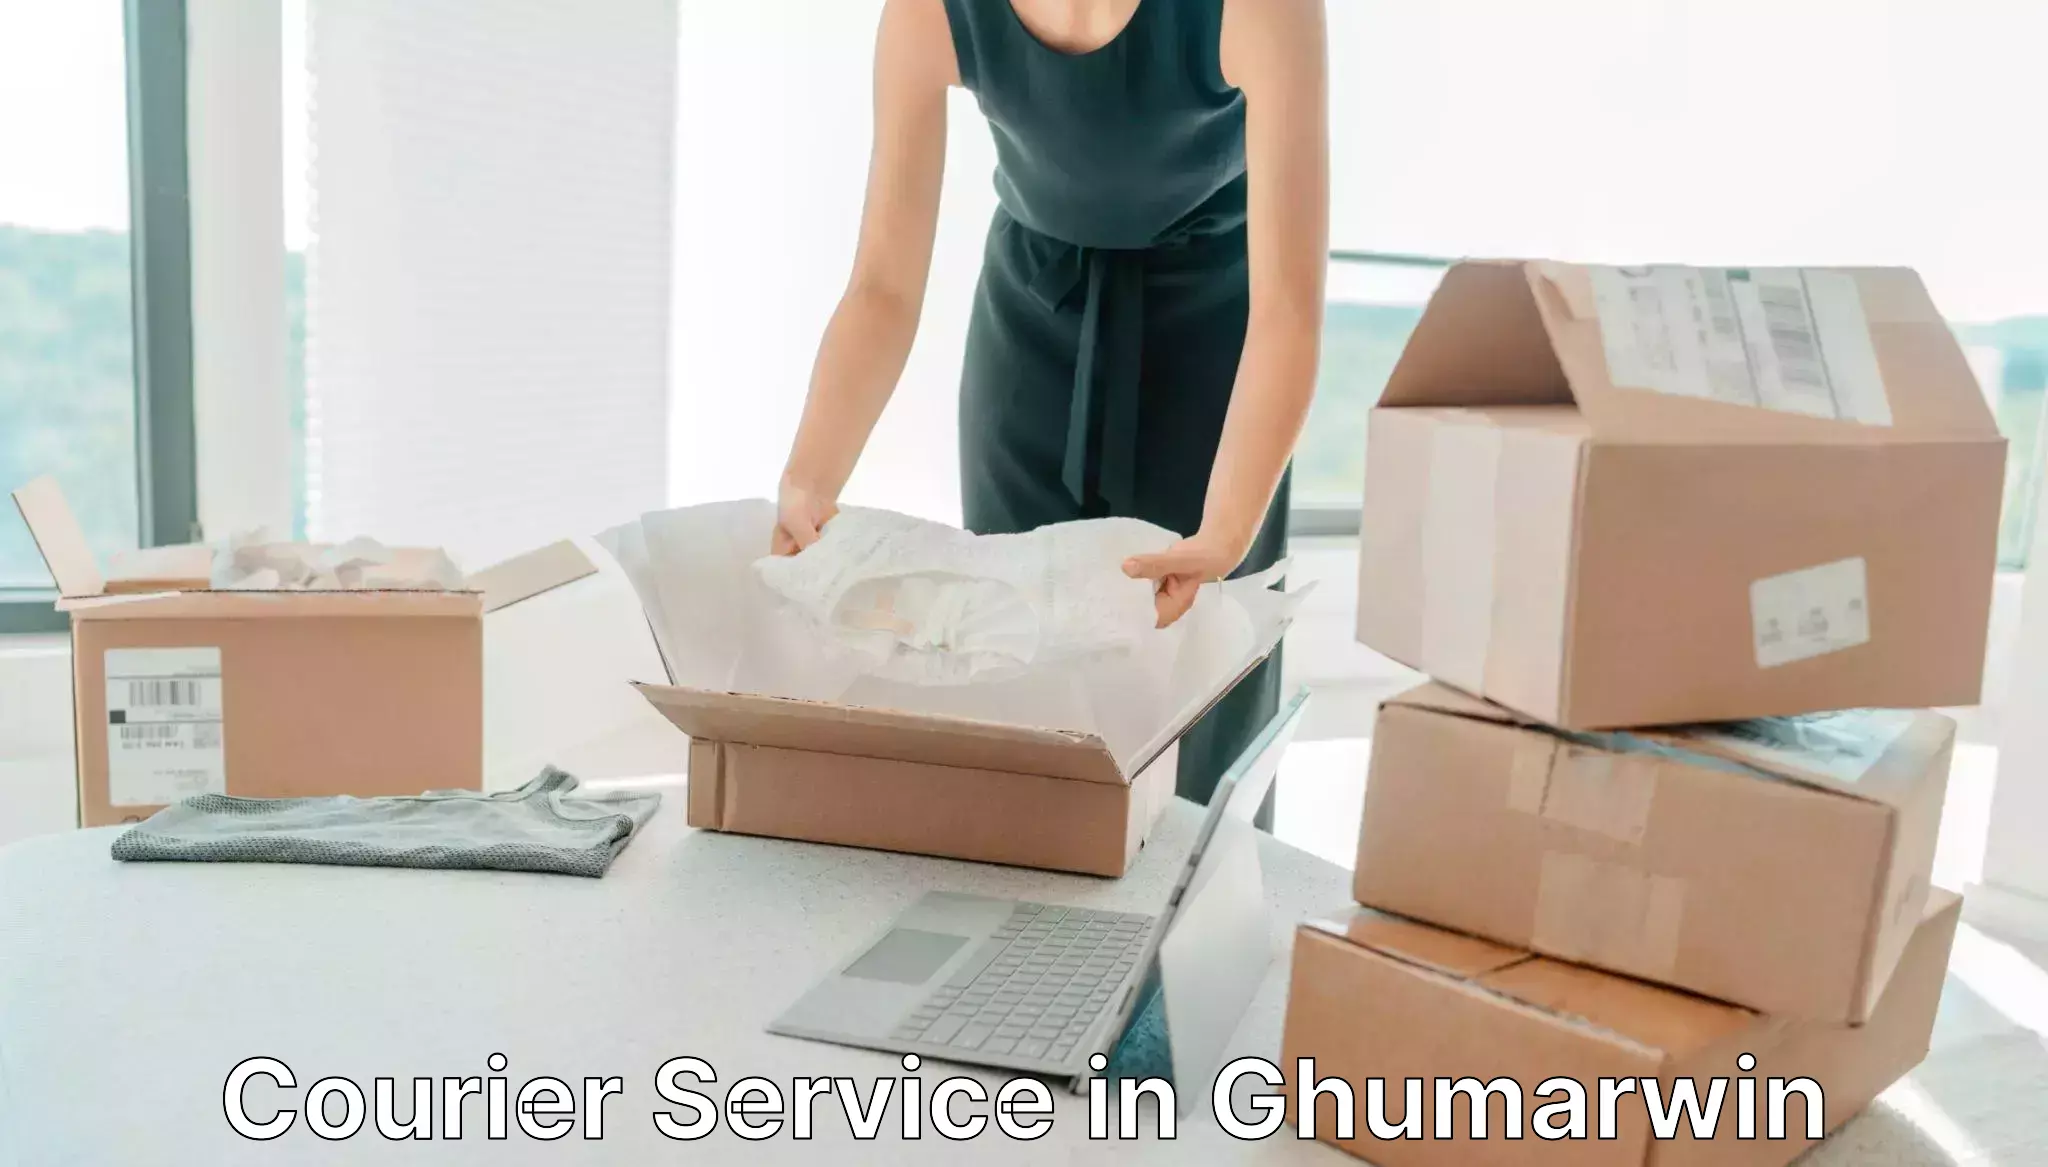 Expedited parcel delivery in Ghumarwin